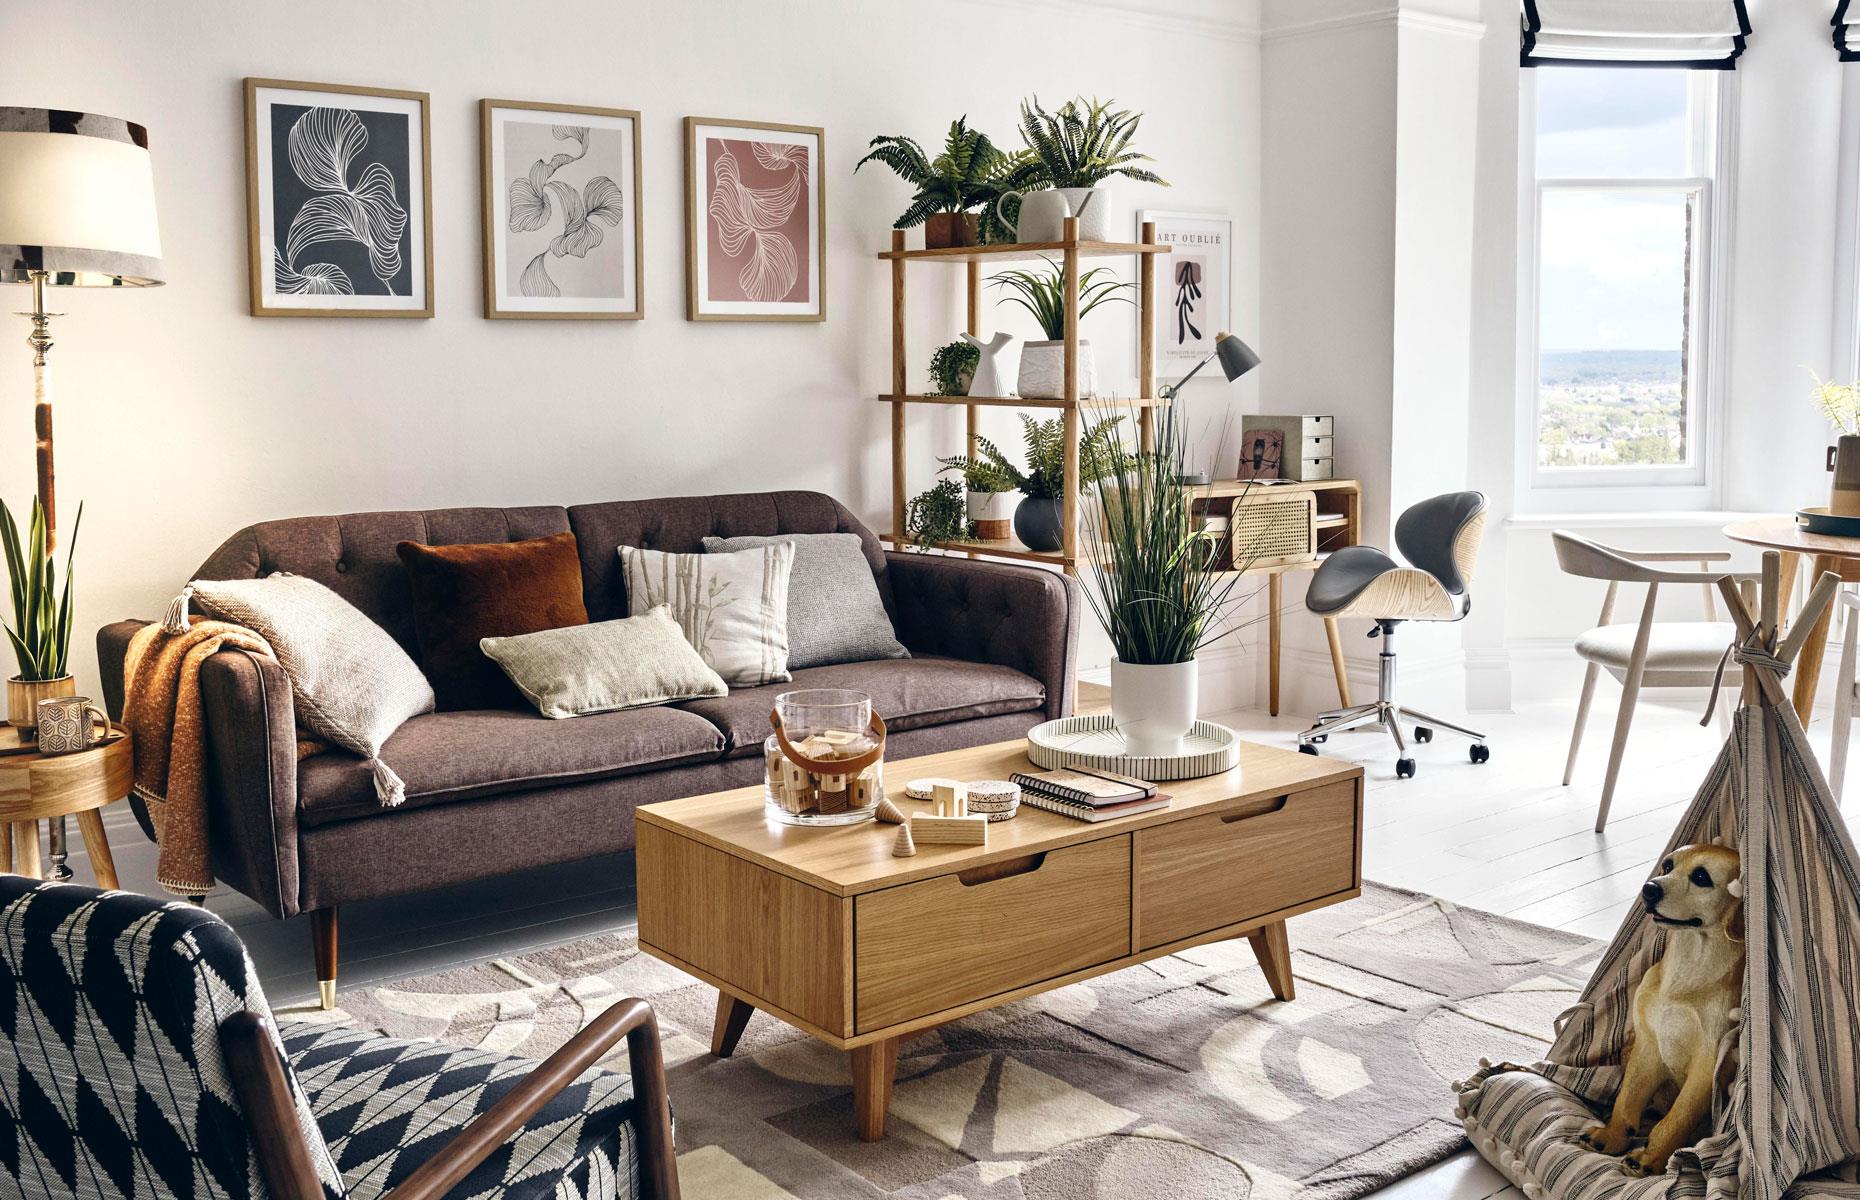 <p>While accent colors can unify distinct zones in a large, open-plan room, they’re not the only tool in a decorator’s arsenal. If you’re more of a minimalist, instead of disrupting a crisp, clean scheme with superfluous hues, why not turn to Mother Nature instead? <a href="https://www.loveproperty.com/gallerylist/83742/15-hardy-houseplants-and-where-to-put-them">Vibrant foliage and houseplants</a> are a great way to create a visual connection between different areas without compromising on a streamlined aesthetic.</p>